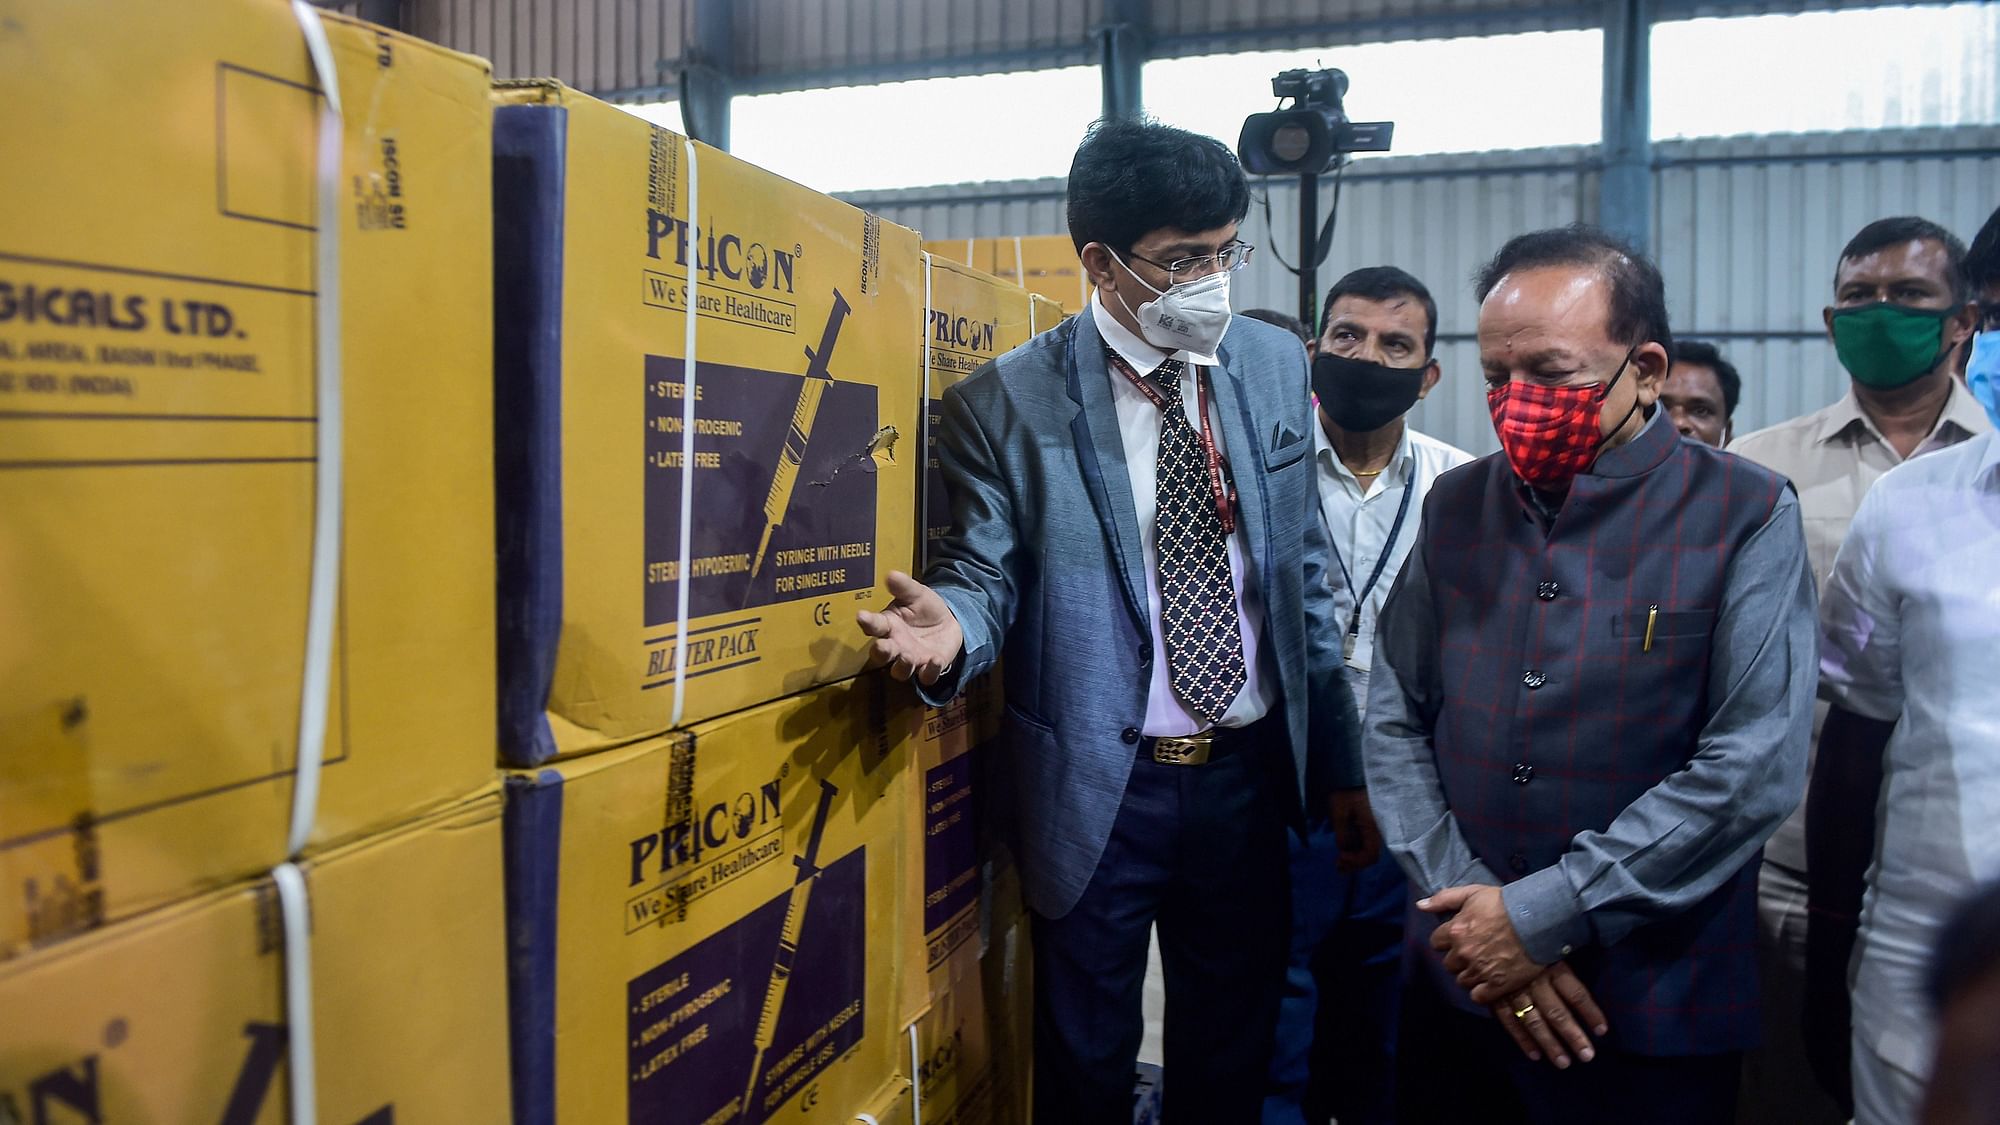 Chennai: Union Health Minister Harsh Vardhan along with Health Secretary J. Radhakrishnan (L) during his visit to review the dry run for administering COVID-19 vaccine, at a COVID-19 vaccine storage and distribution centre in Chennai, Friday, 8 January 2021. Image used for representation.&nbsp;